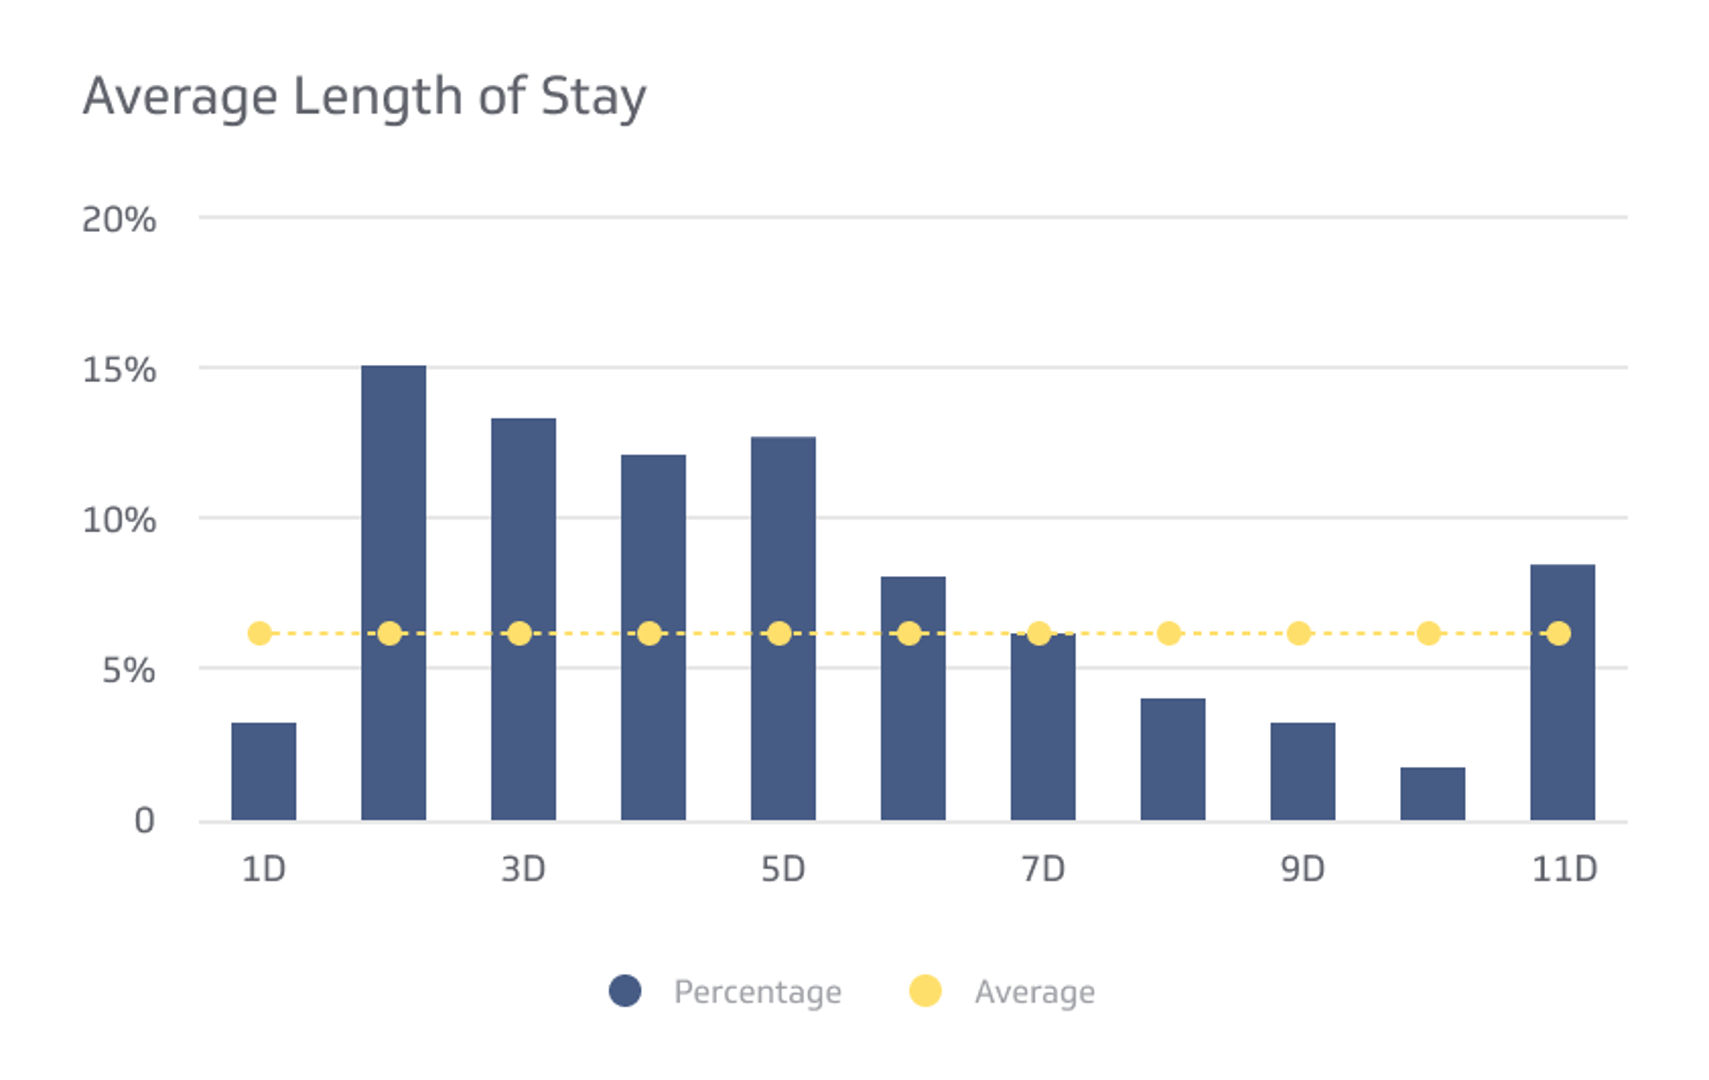 Related KPI Examples - Average Length of Stay Metric